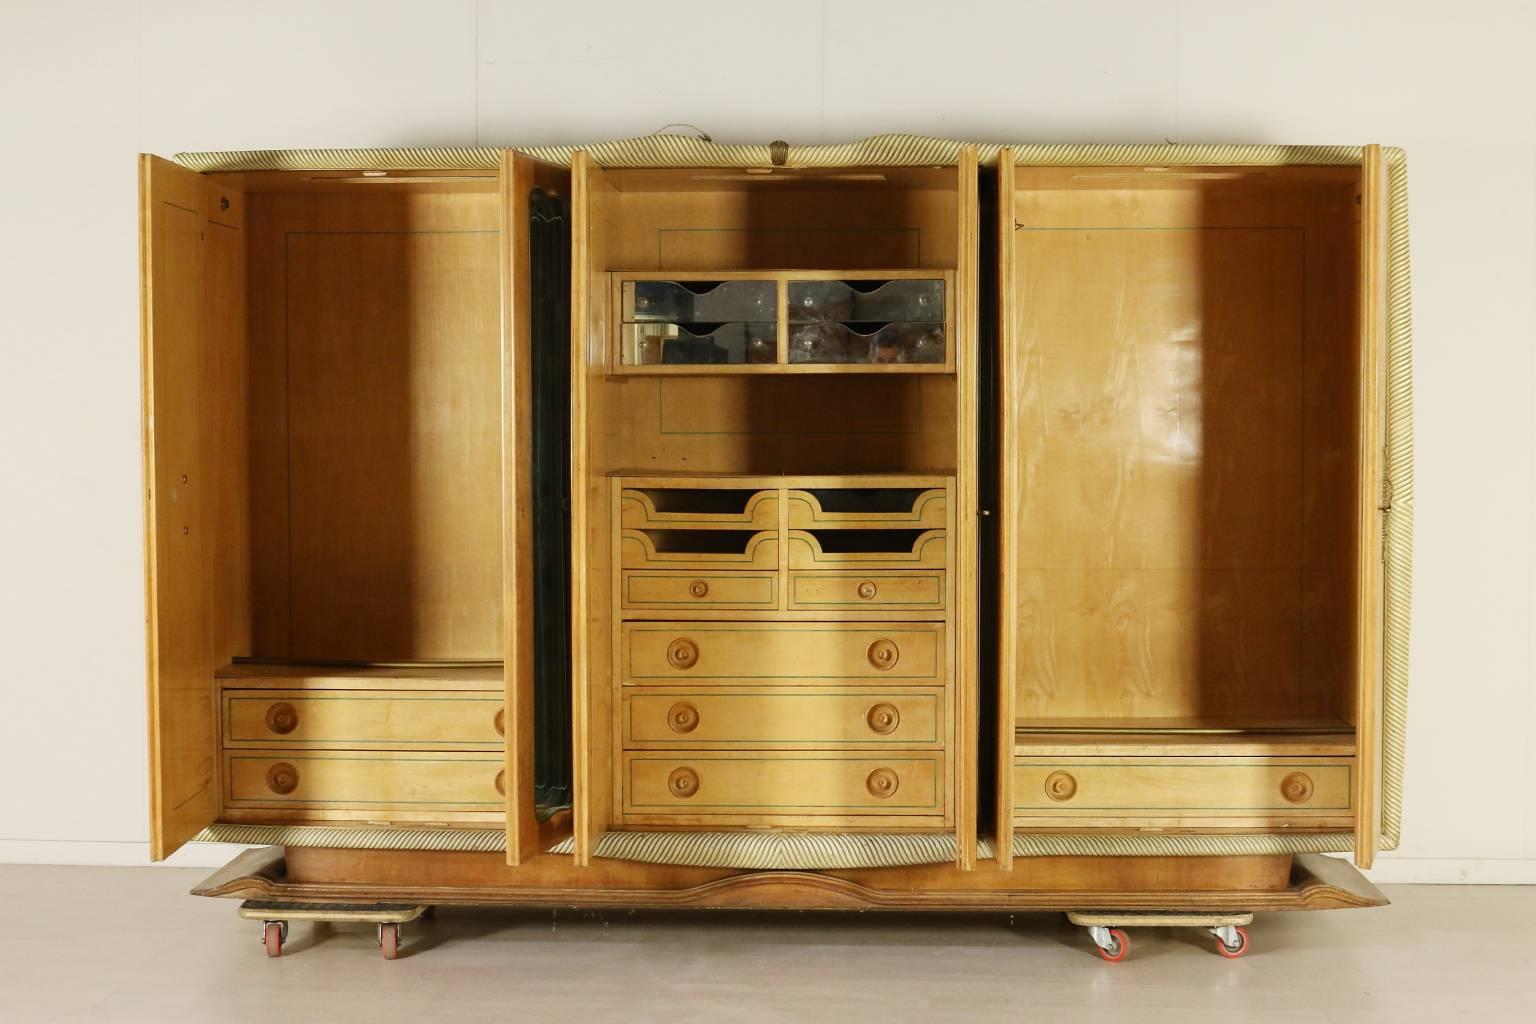 A six doors wardrobe, burl veneer, decorated mirror, carved and lacquered frame, brass details. Manufactured in Italy, 1930s.